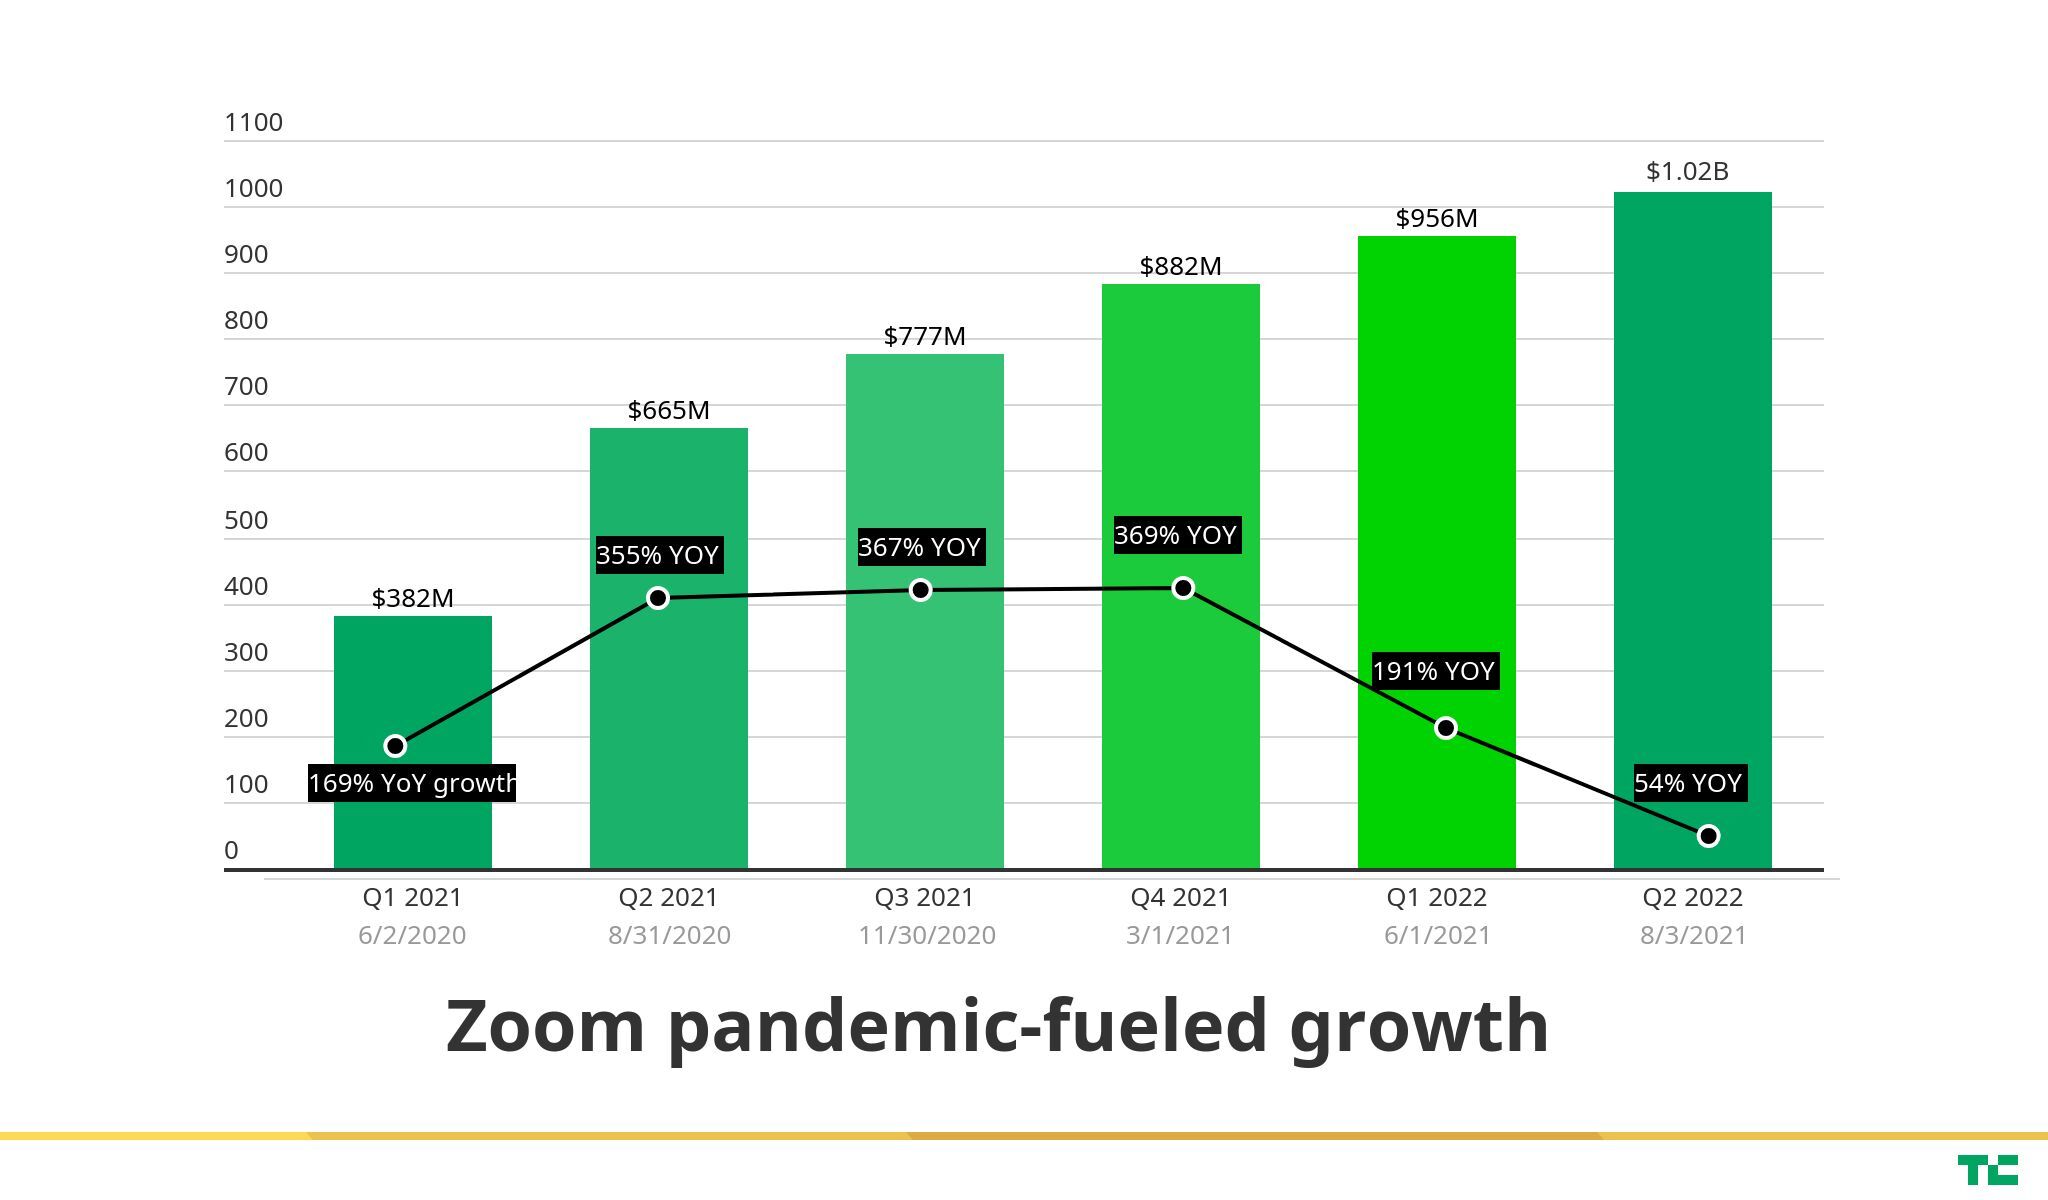 Graph showing Zoom's triple digit revenue growth throughout the pandemic, which recently slowed to 54%.